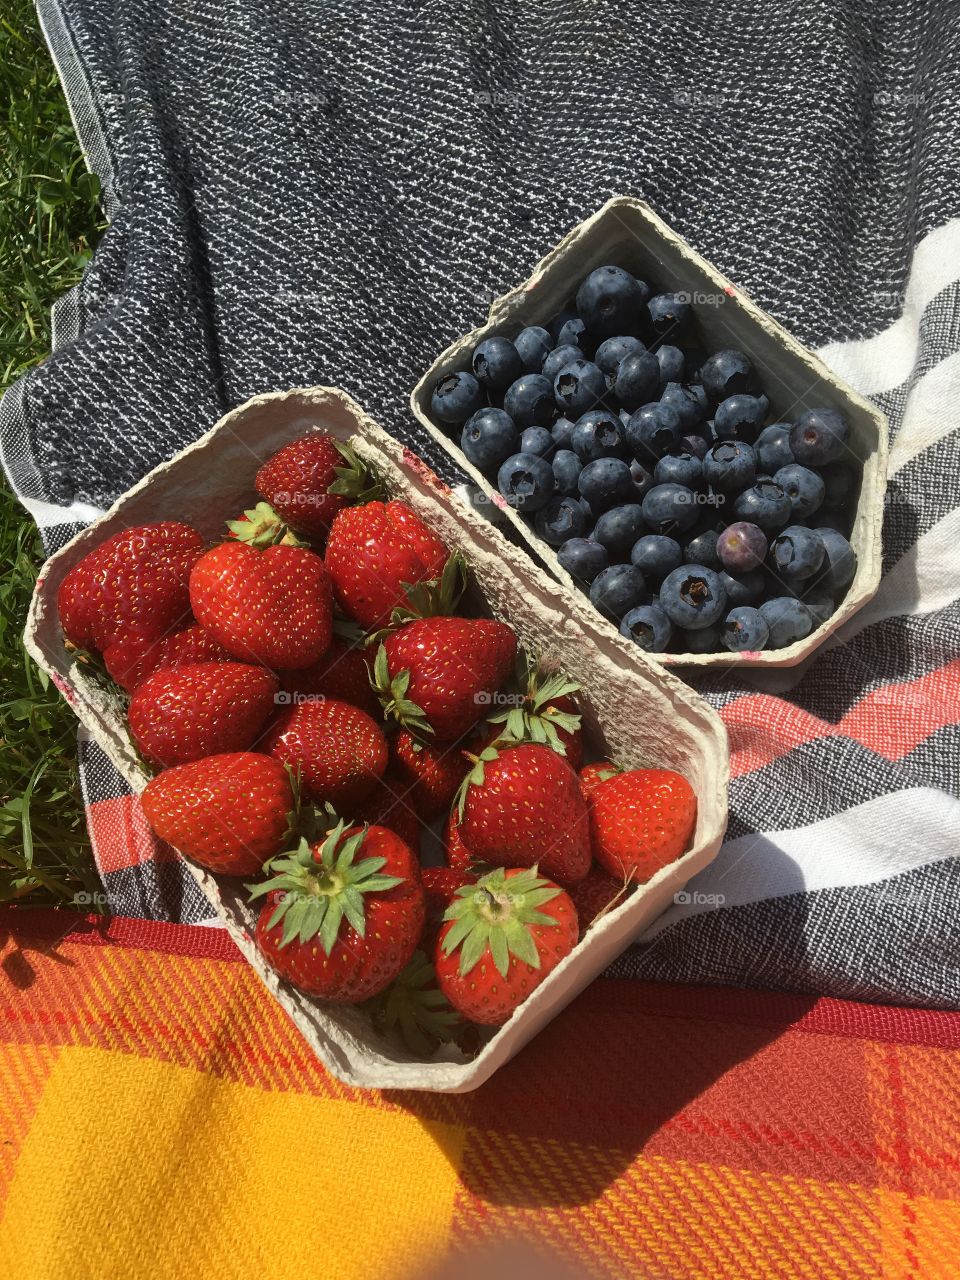 Strawberries and blueberries 